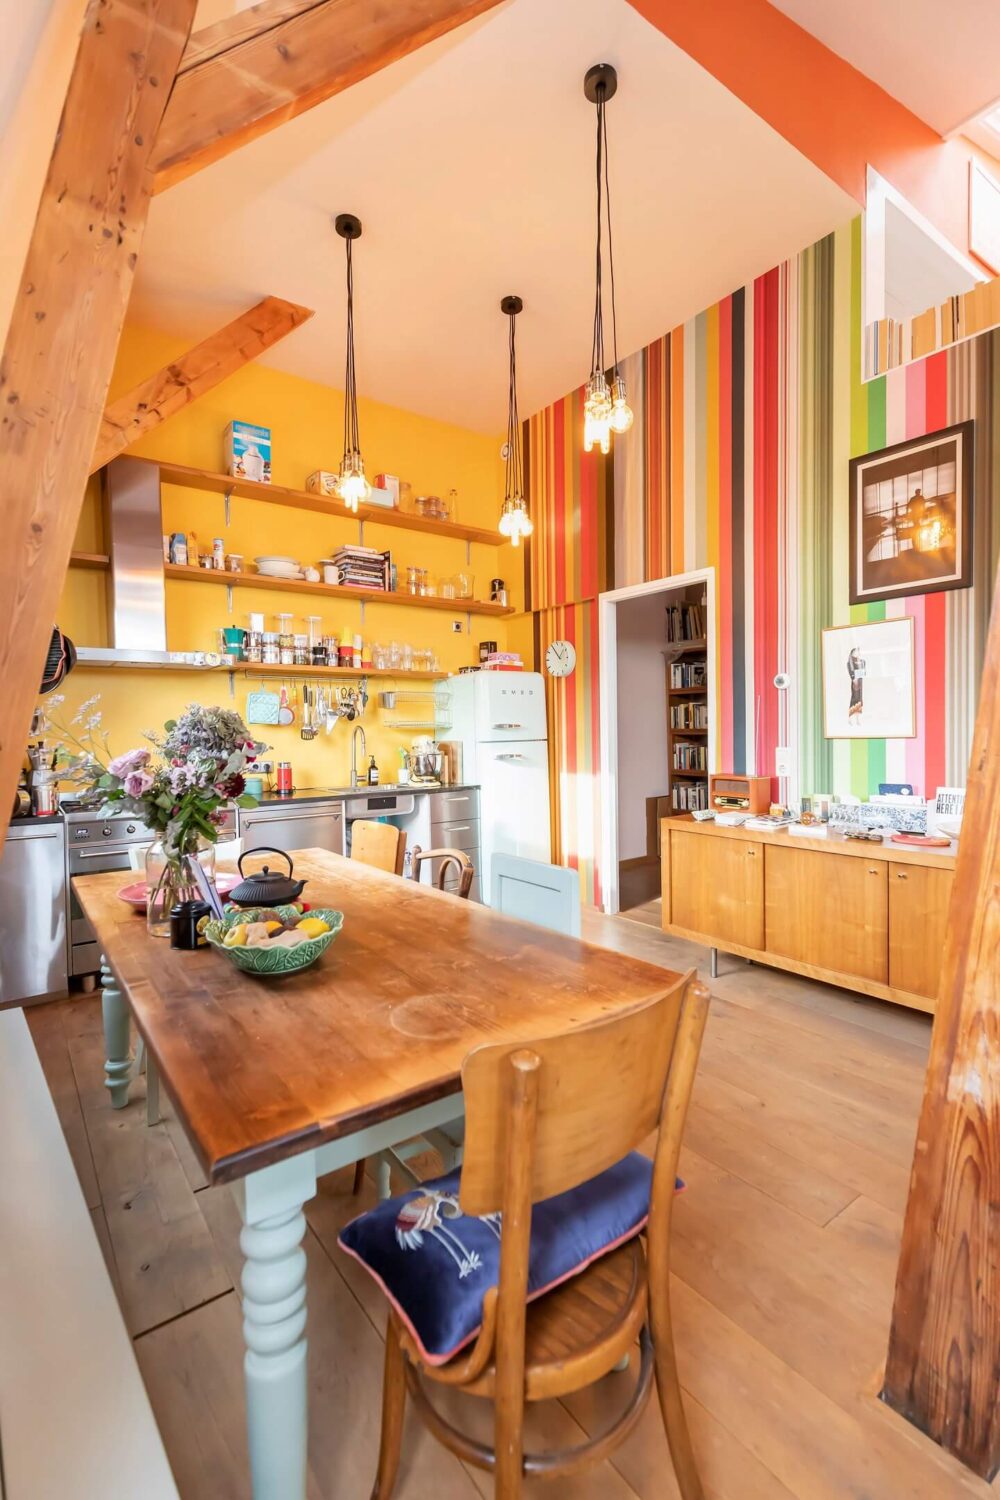 striped-wall-dining-area-kitchen-colorful-loft-nordroom